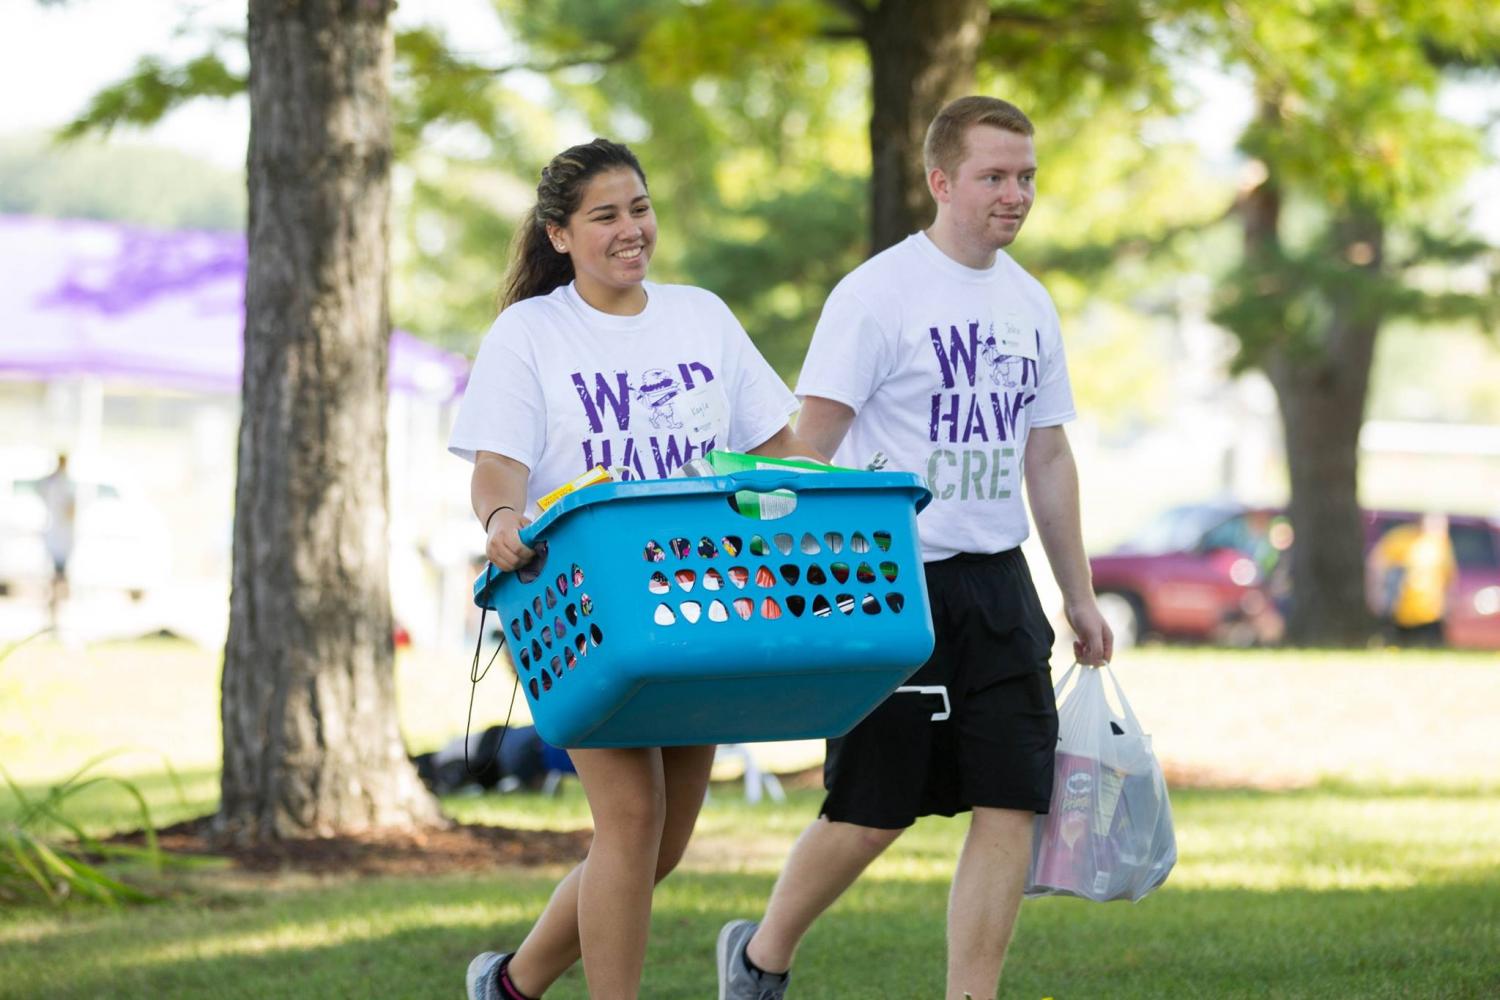 Freshman ULEAD students Kayla Grzenia and John Dickenson help a fellow student in Lee Hall move in their belongings. Students at the University of Wisconsin-Whitewater moved into their residence halls on Sunday, Sept. 3. Campus leaders assisted students with unloading personal belongings from vehicles and delivering it to their rooms. 